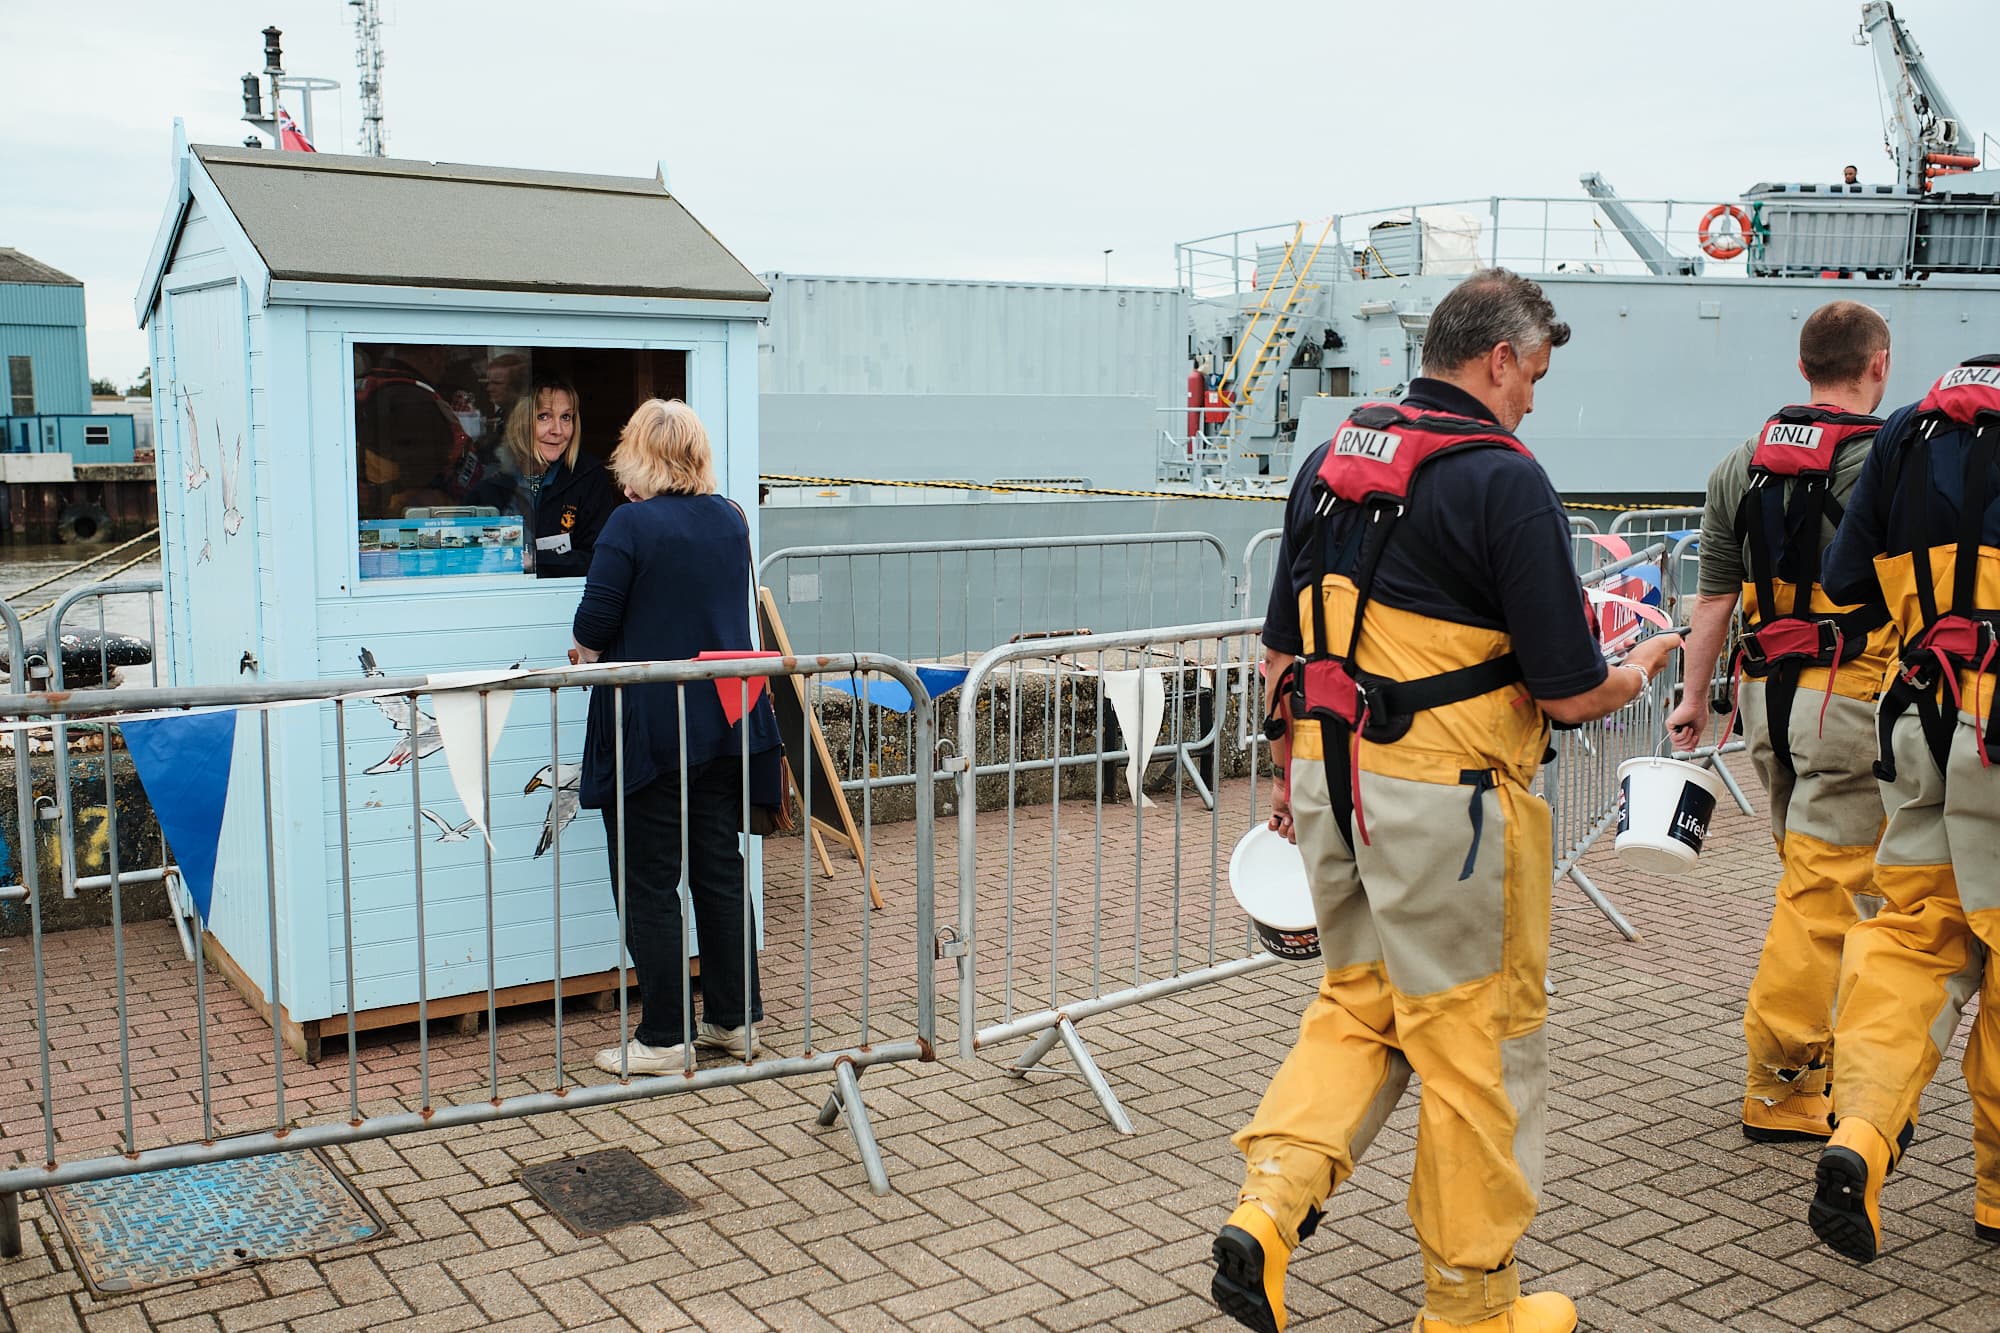 RNLI crew and a ticket booth